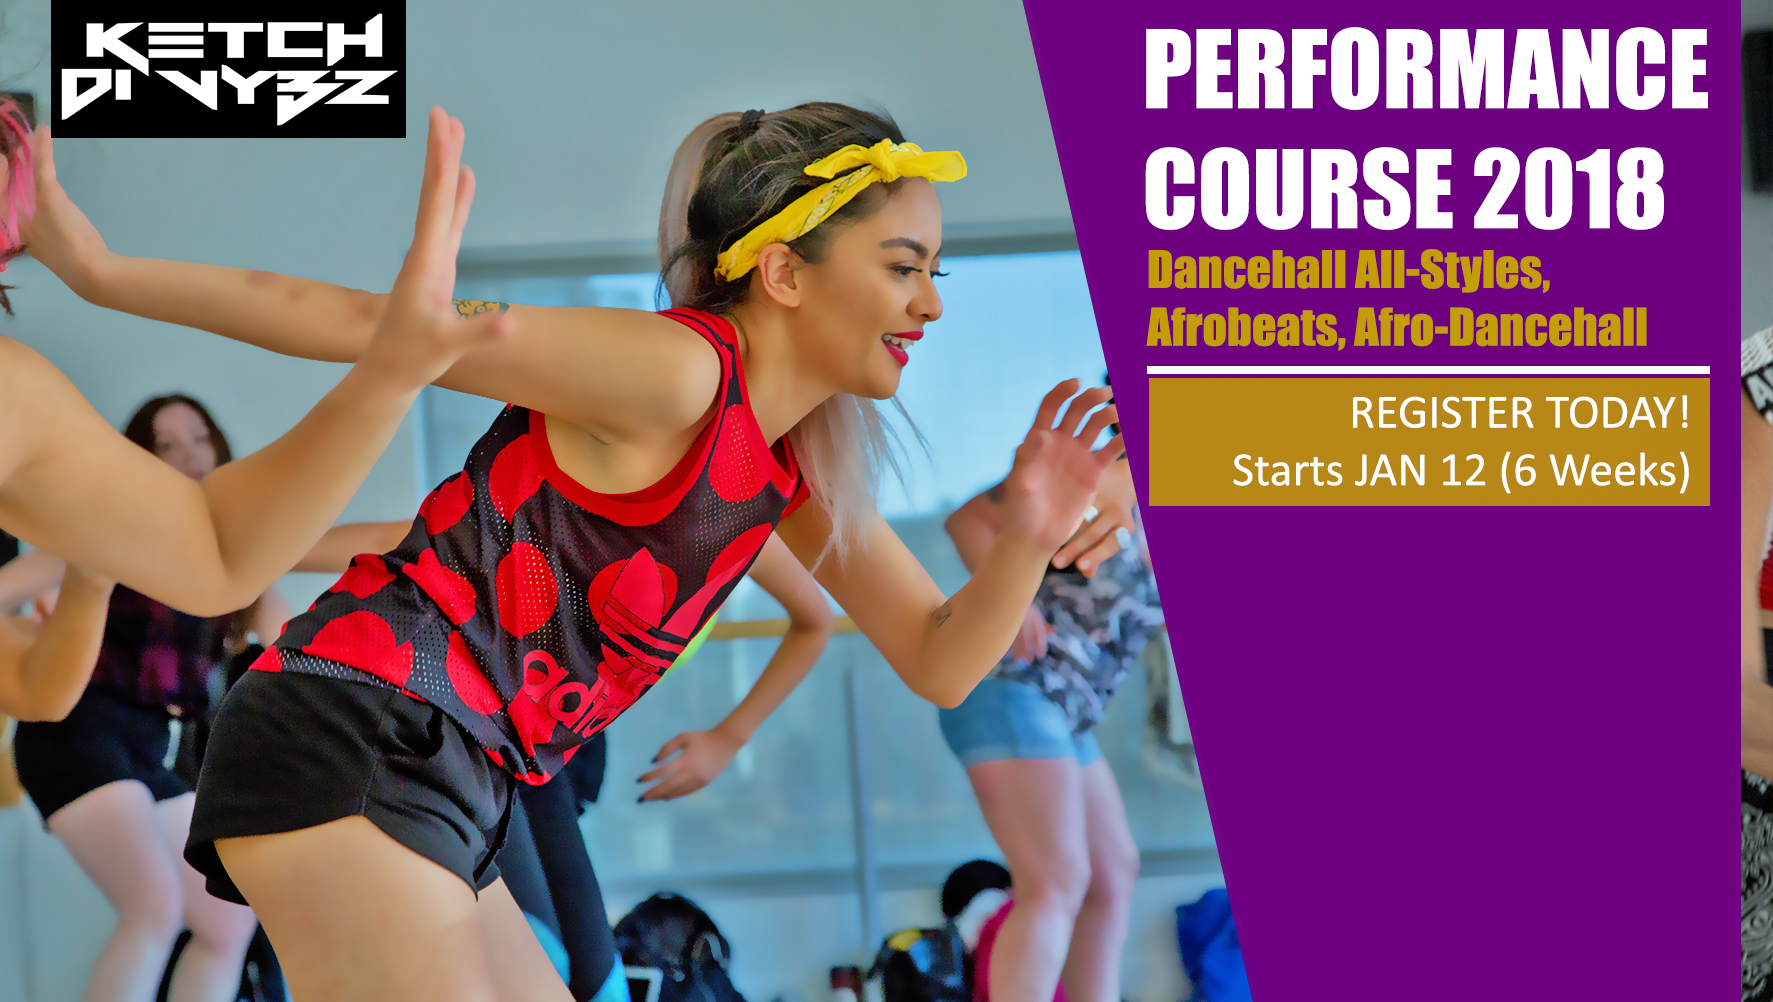 Register Today! Performance Course